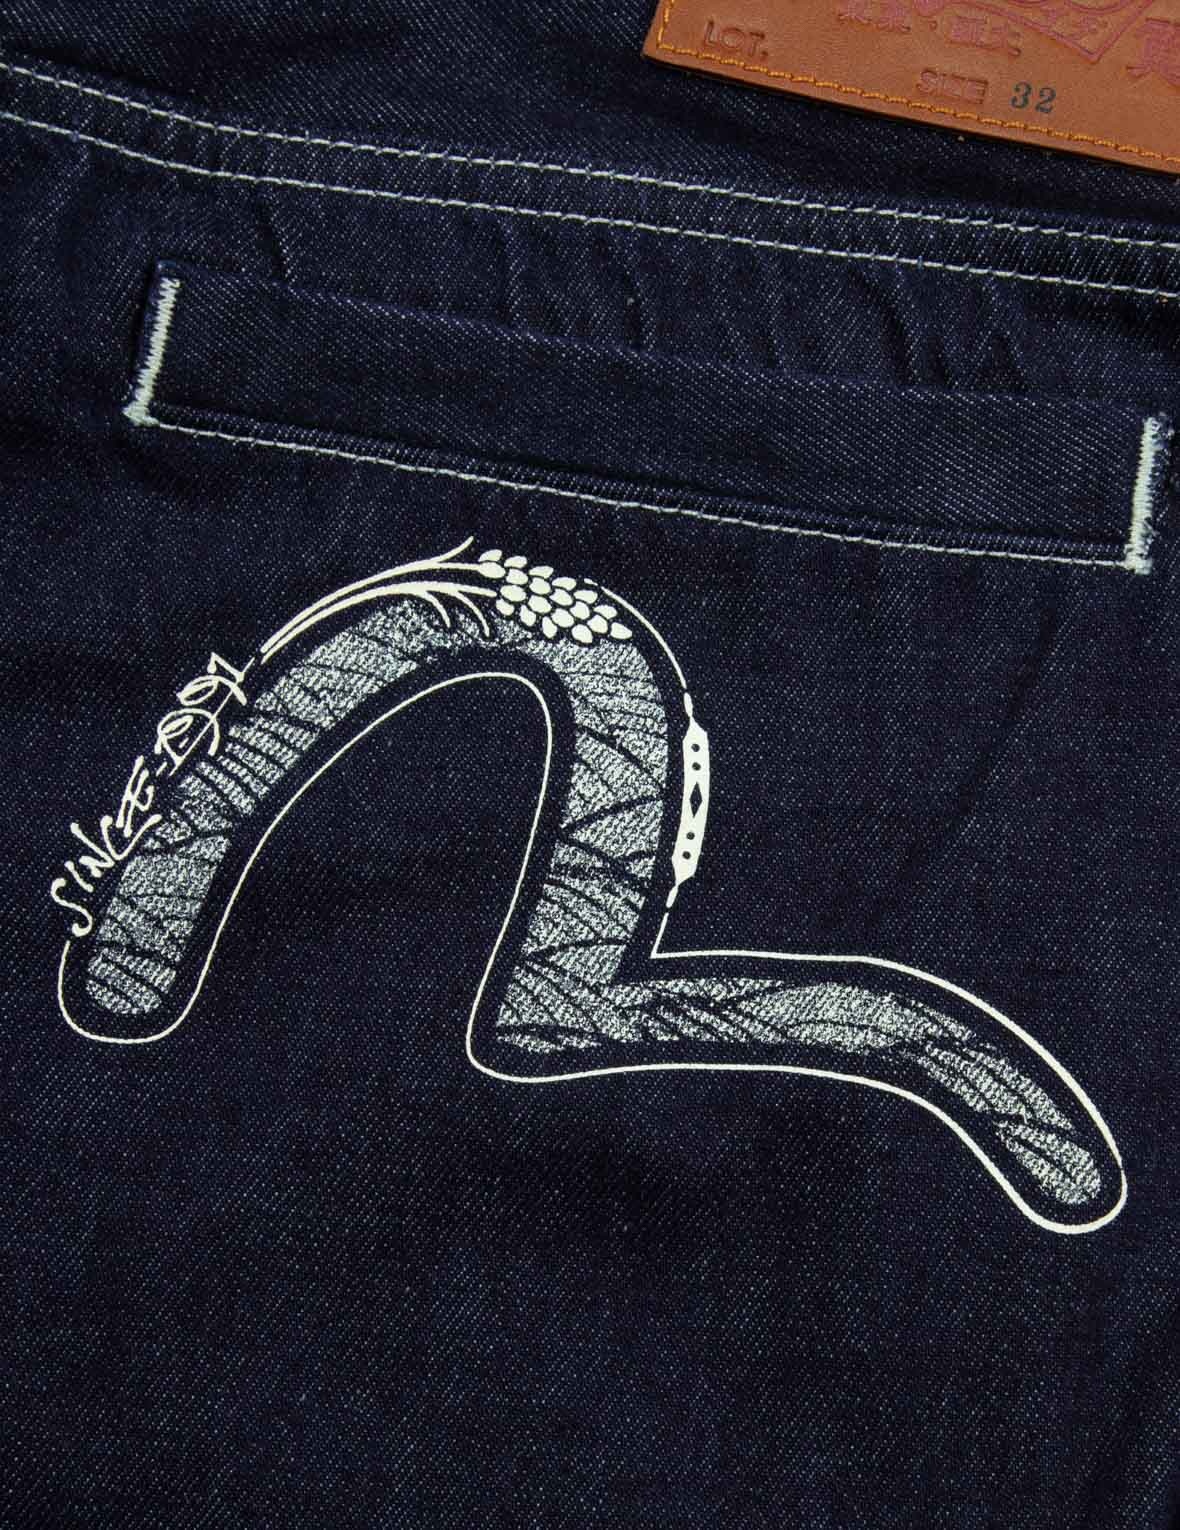 SEAGULL AND LOGO PRINT BALLOON FIT JEANS - 11